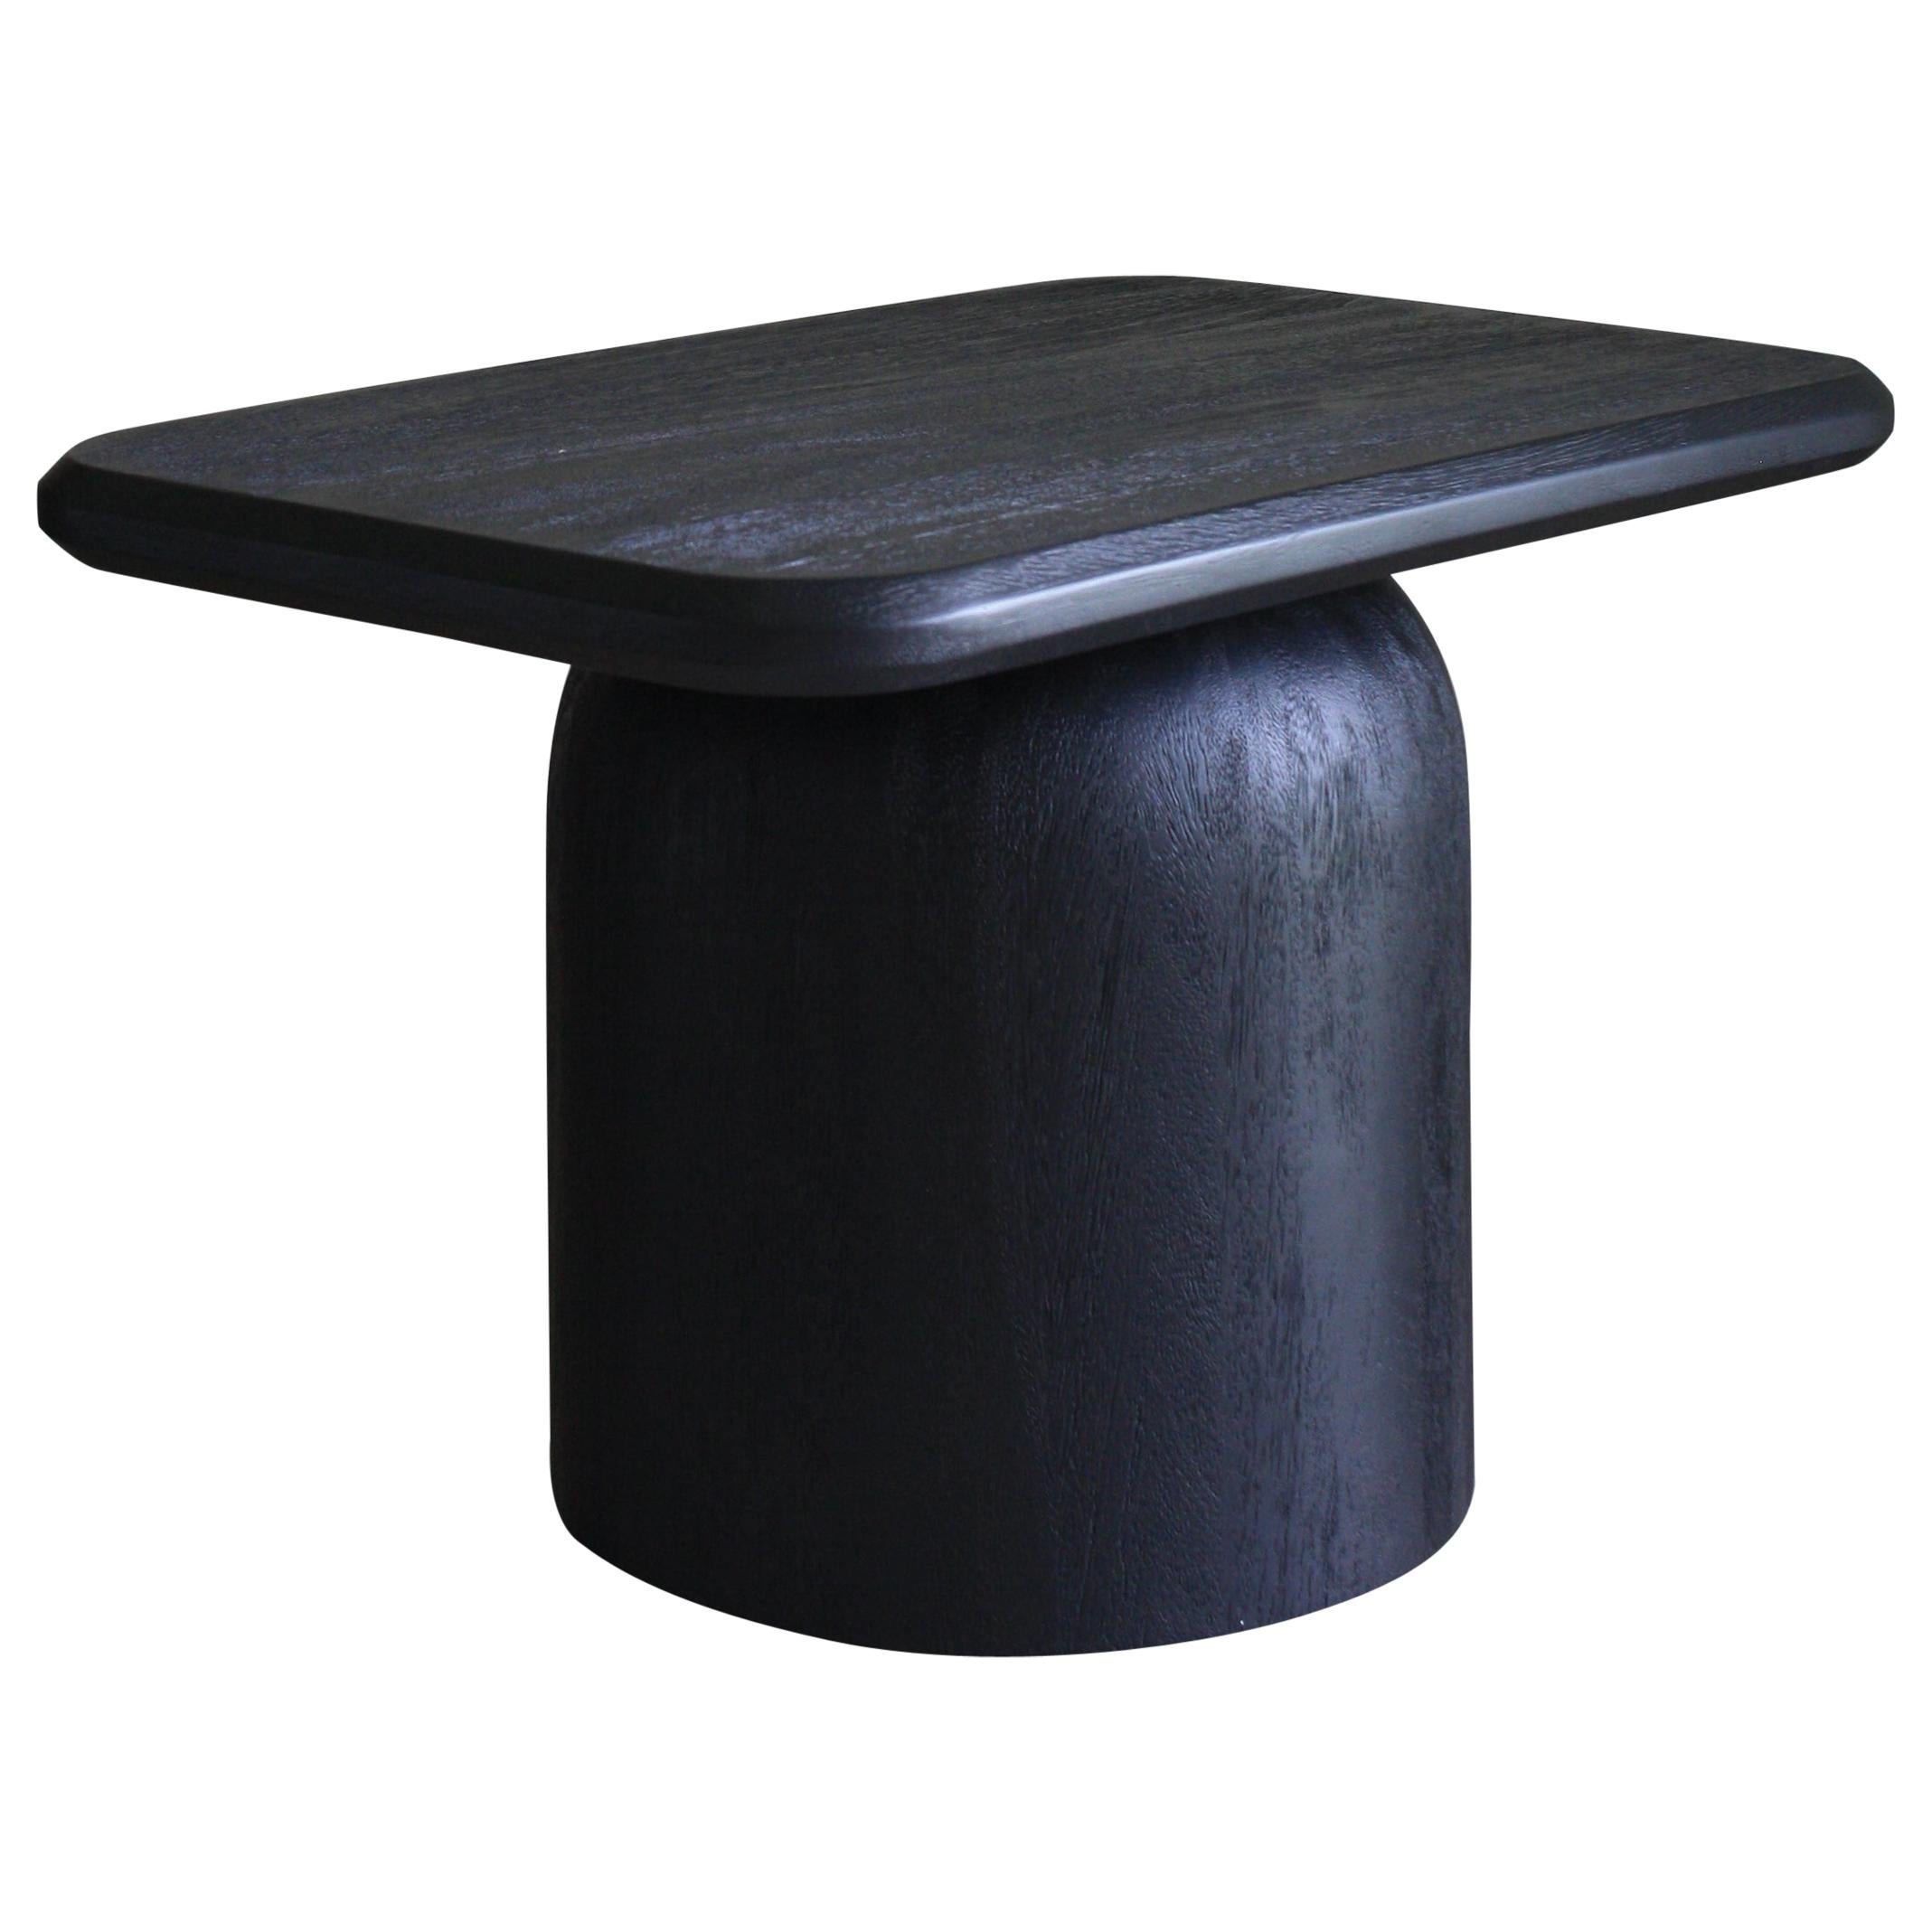 Black stained Conacaste wood hollow center for weight in base and solid wood top.

Part of Labrica's Arco collection was inspired by Spanish Colonial Architecture found in Antigua Guatemala.

We played with architectural elements such as arches and